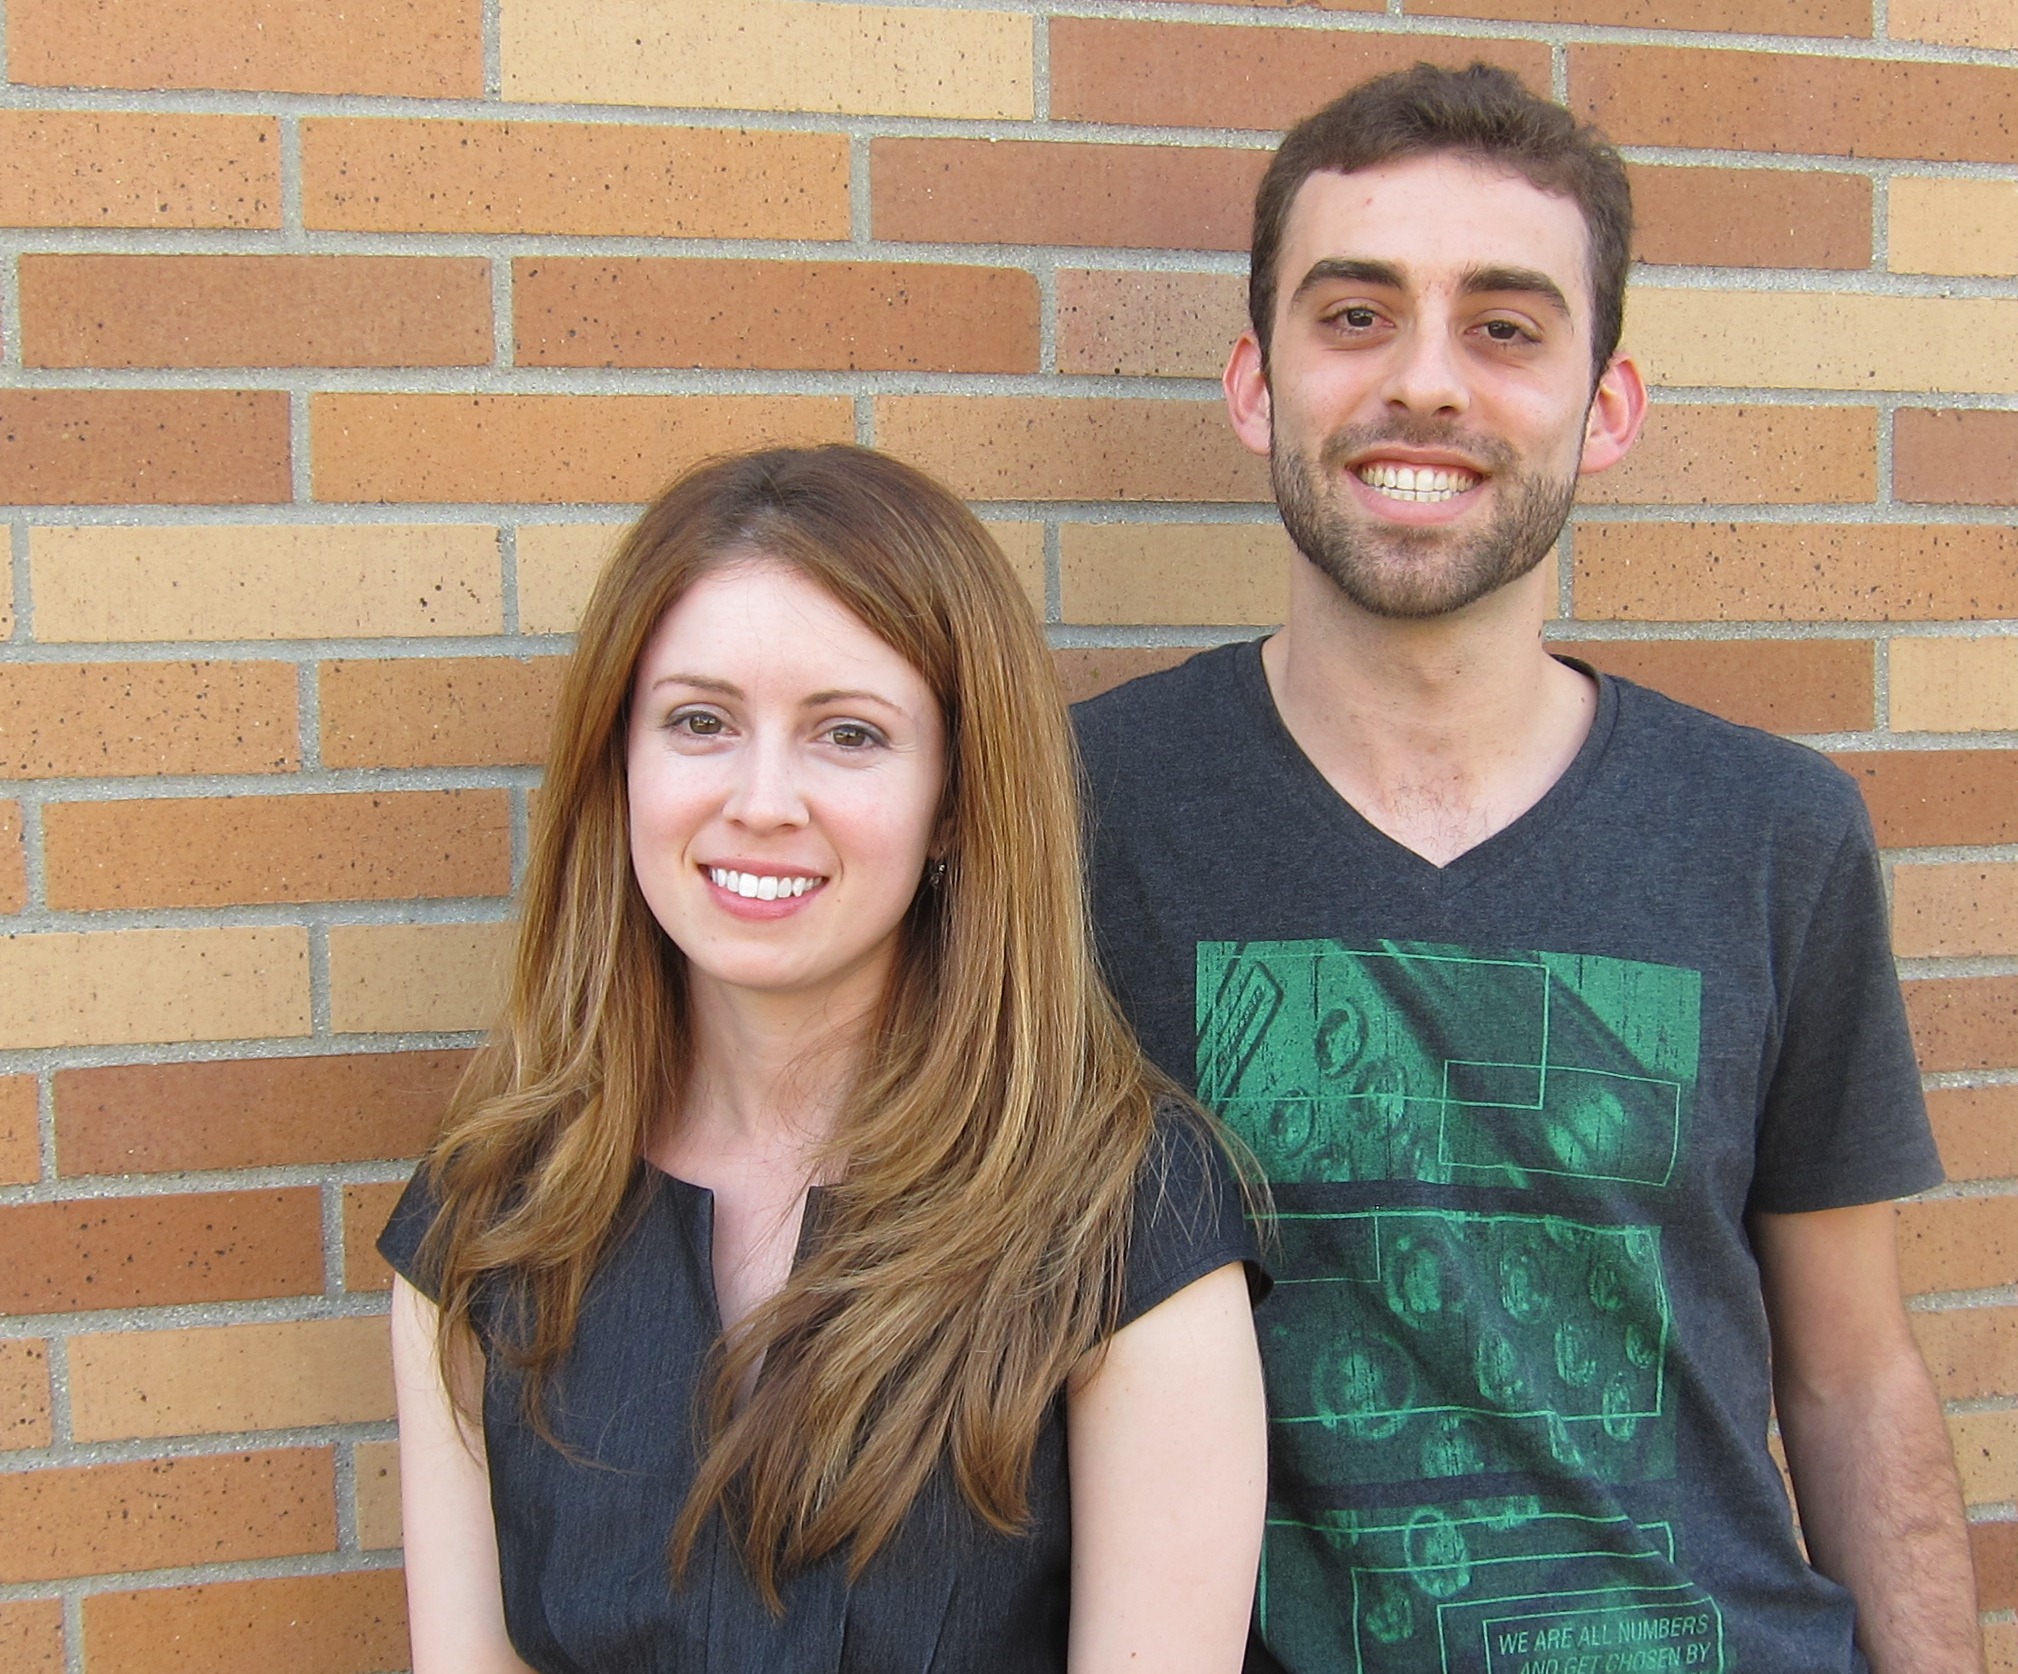 Graduate students Elise Drakes and Greg Yudin will travel to China later this month to compete as finalists in the Henkel Innovation Challenge.